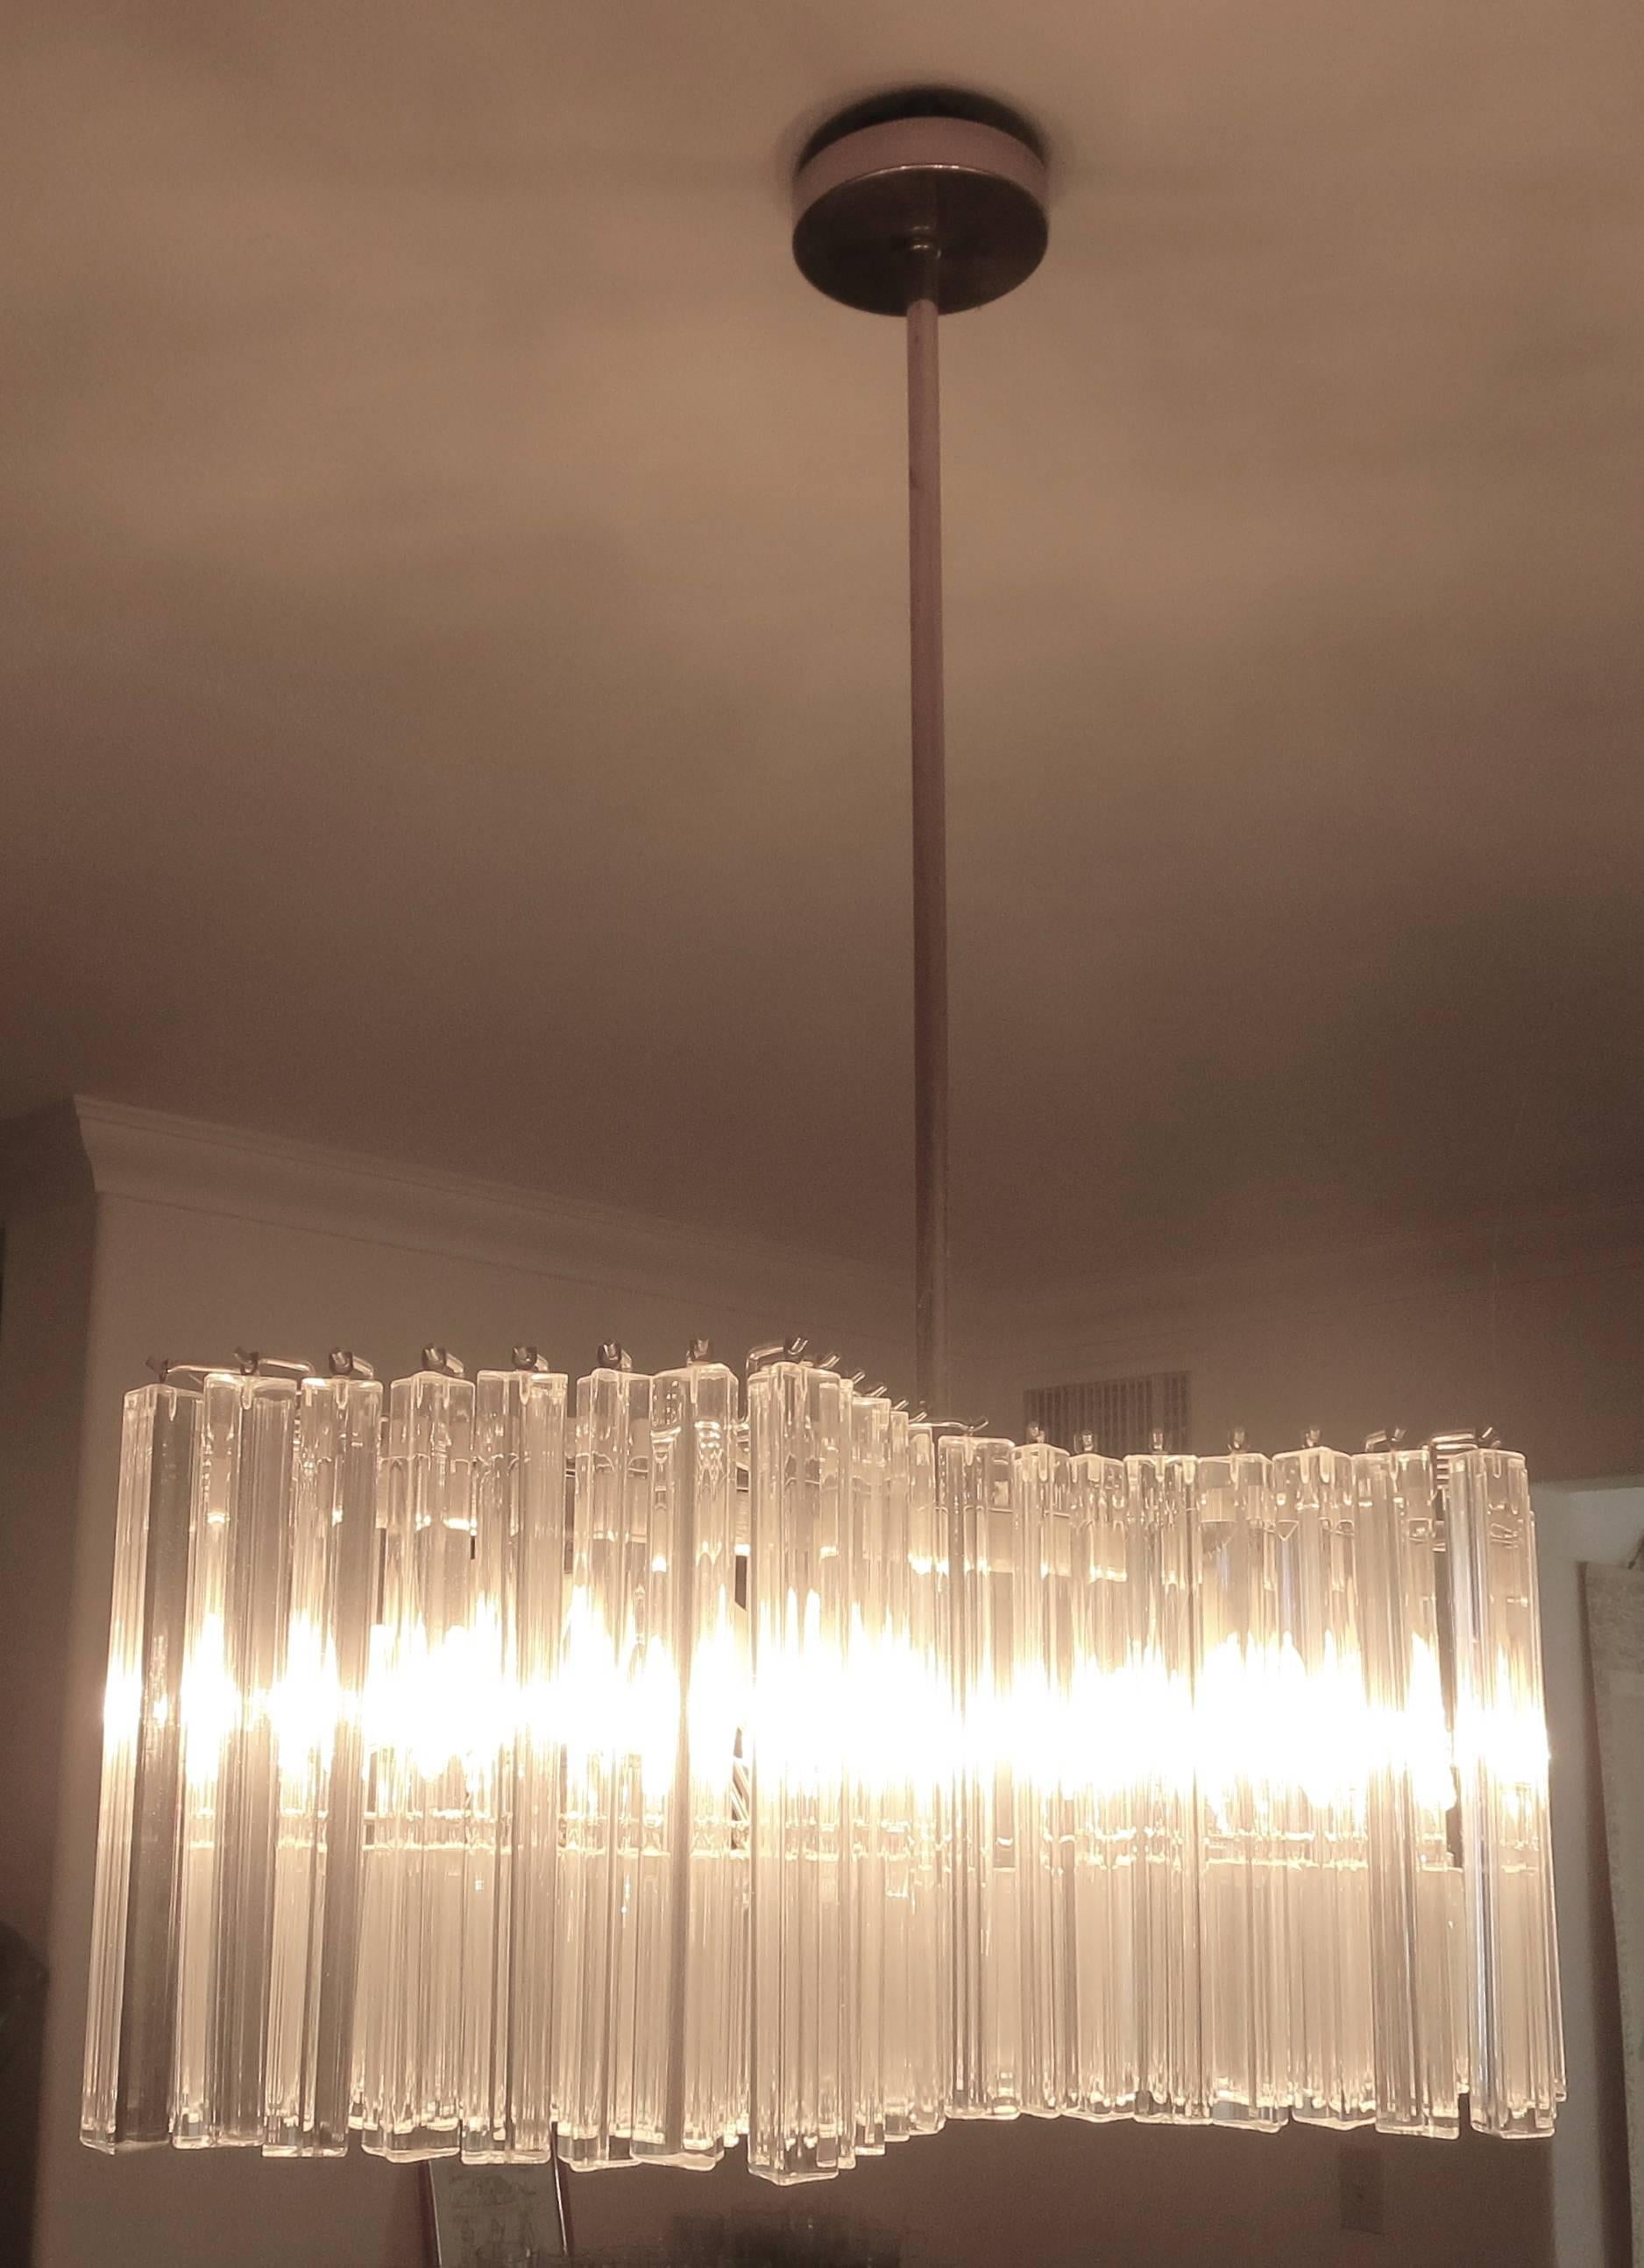 Venini chandelier, with Trilobi glass, Italy, circa 1970s, double rhombus shape with short and tall glass pendants, Murano triedri prism glass Italy with brass and steel frame, great and unique shape.